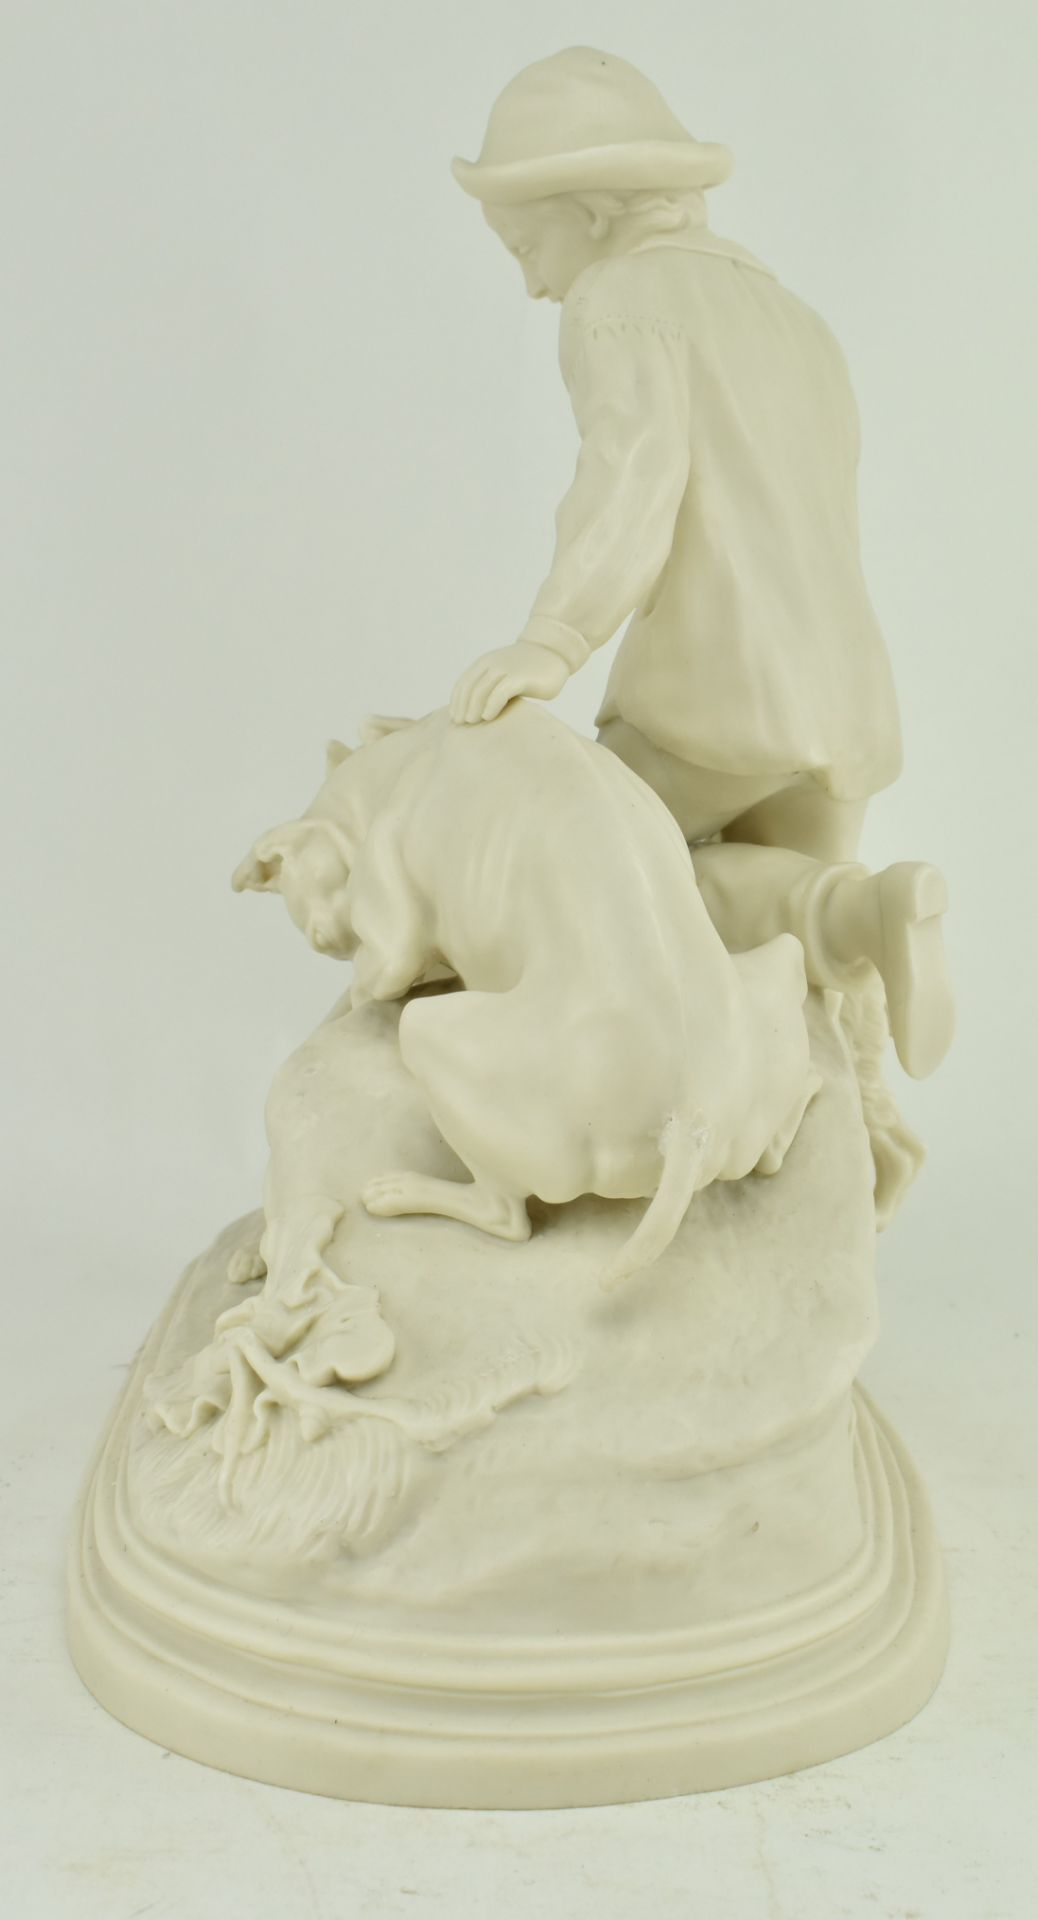 COPELAND AFTER P J. MENE - PARIAN WARE HUNTING FIGURE - Image 4 of 7